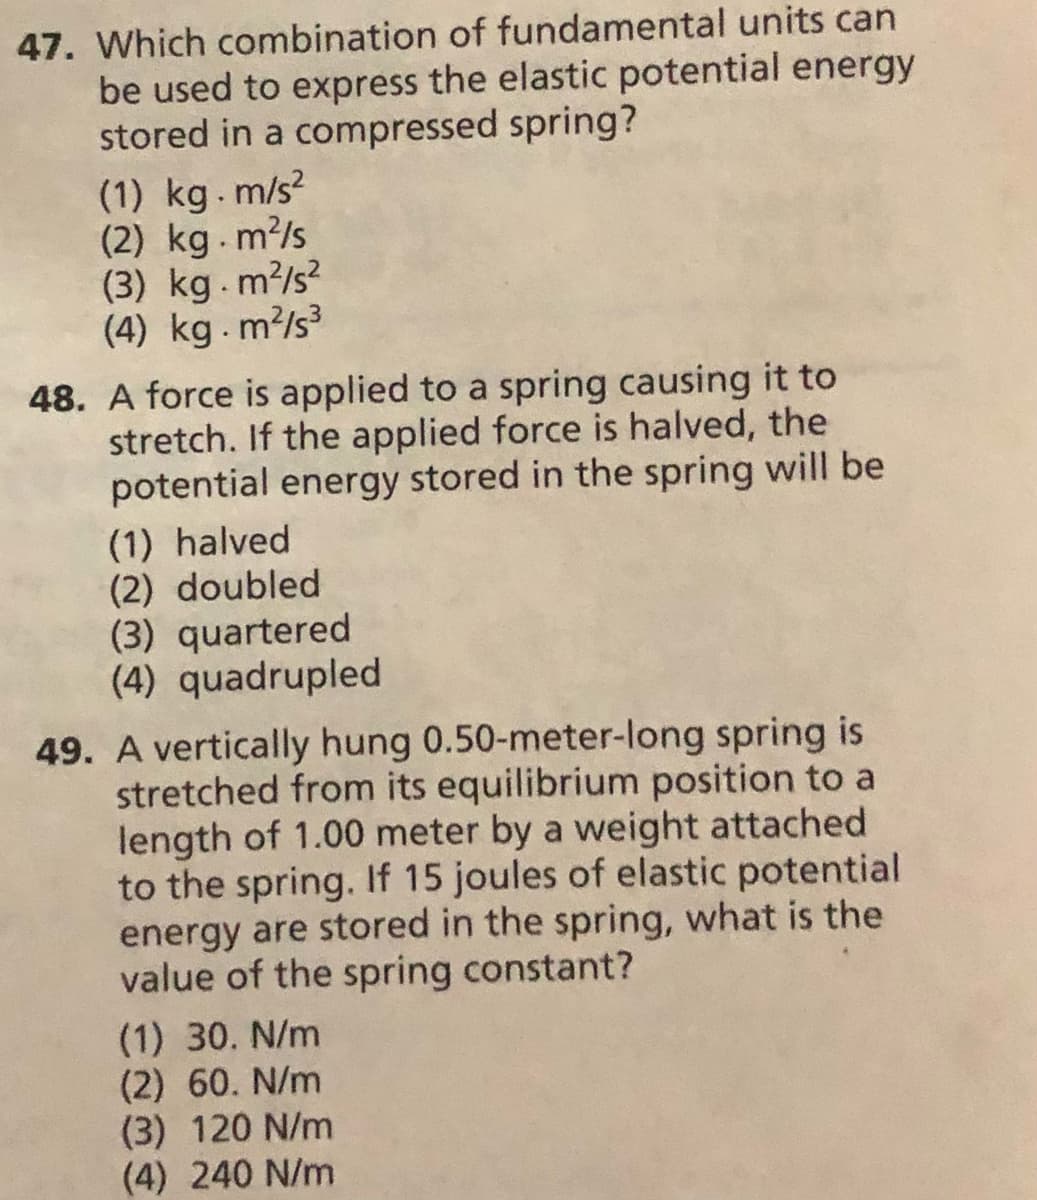 47. Which combination of fundamental units can
be used to express the elastic potential energy
stored in a compressed spring?
(1) kg.m/s?
(2) kg.m?/s
(3) kg. m?/s?
(4) kg.m?/s
48. A force is applied to a spring causing it to
stretch. If the applied force is halved, the
potential energy stored in the spring will be
(1) halved
(2) doubled
(3) quartered
(4) quadrupled
49. A vertically hung 0.50-meter-long spring is
stretched from its equilibrium position to a
length of 1.00 meter by a weight attached
to the spring. If 15 joules of elastic potential
energy are stored in the spring, what is the
value of the spring constant?
(1) 30. N/m
(2) 60. N/m
(3) 120 N/m
(4) 240 N/m
